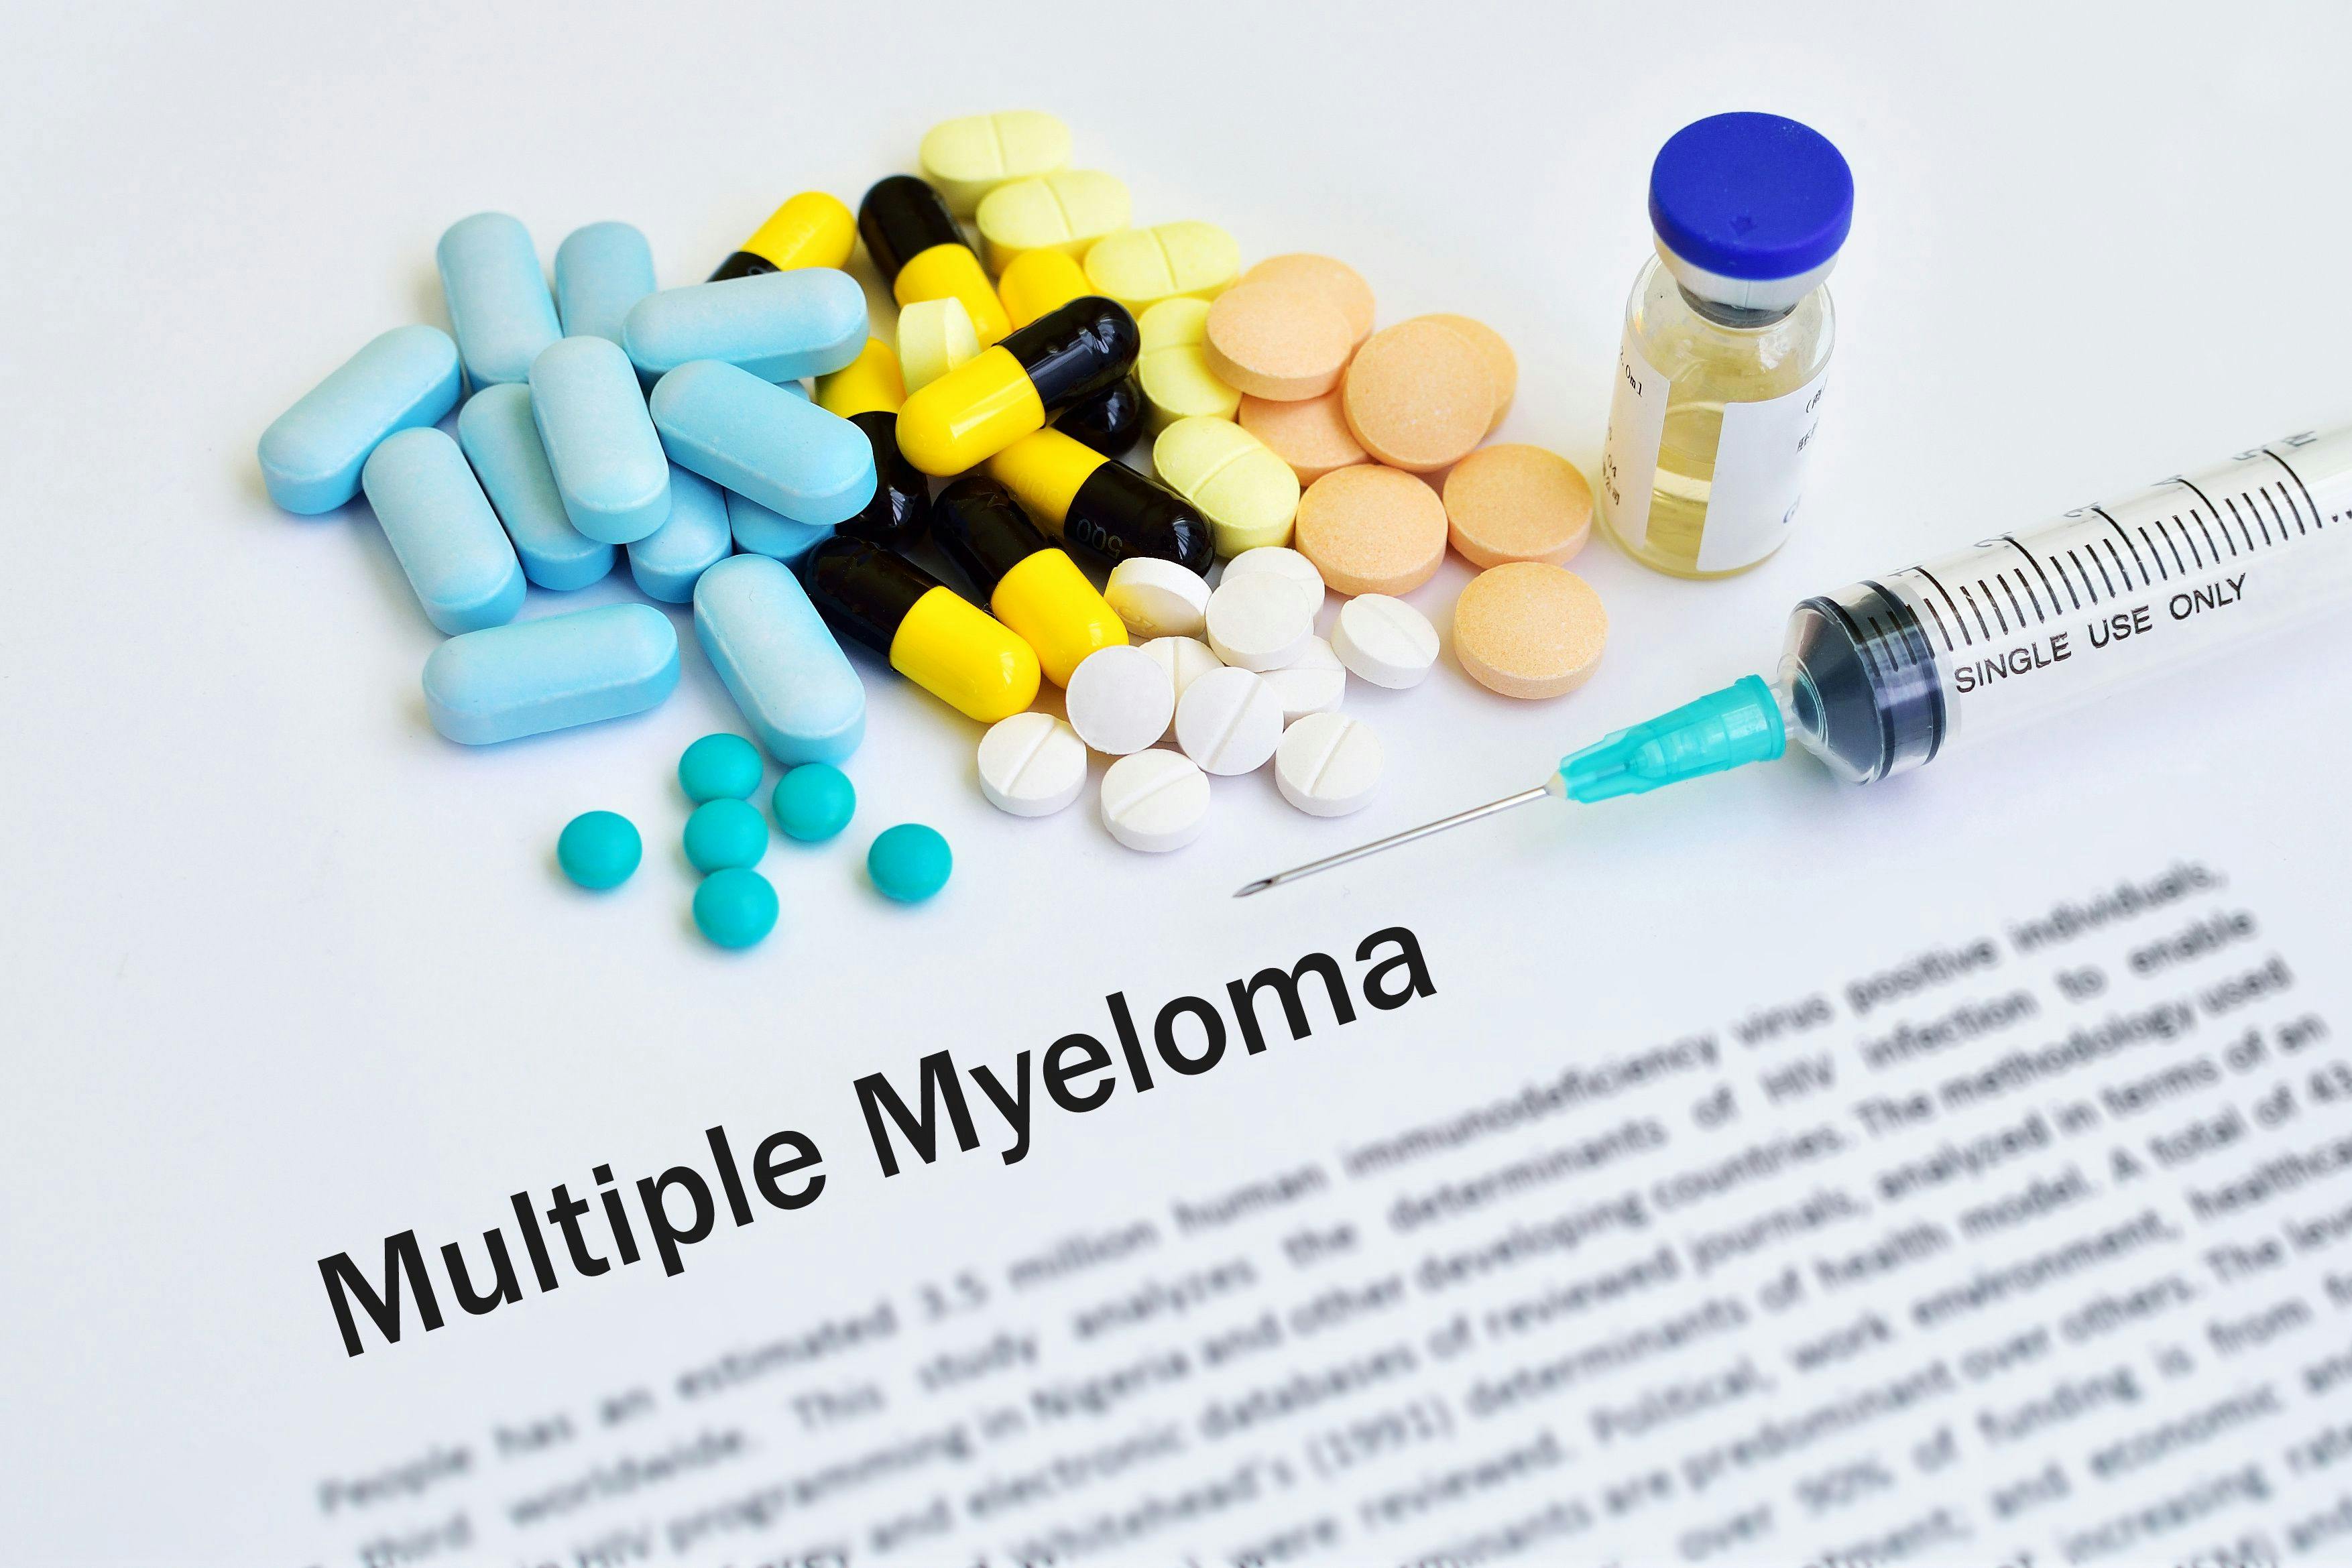 A Lower Dose of Xpovio May Help Patients With Myeloma Get the ‘Full Benefit of the Drug’